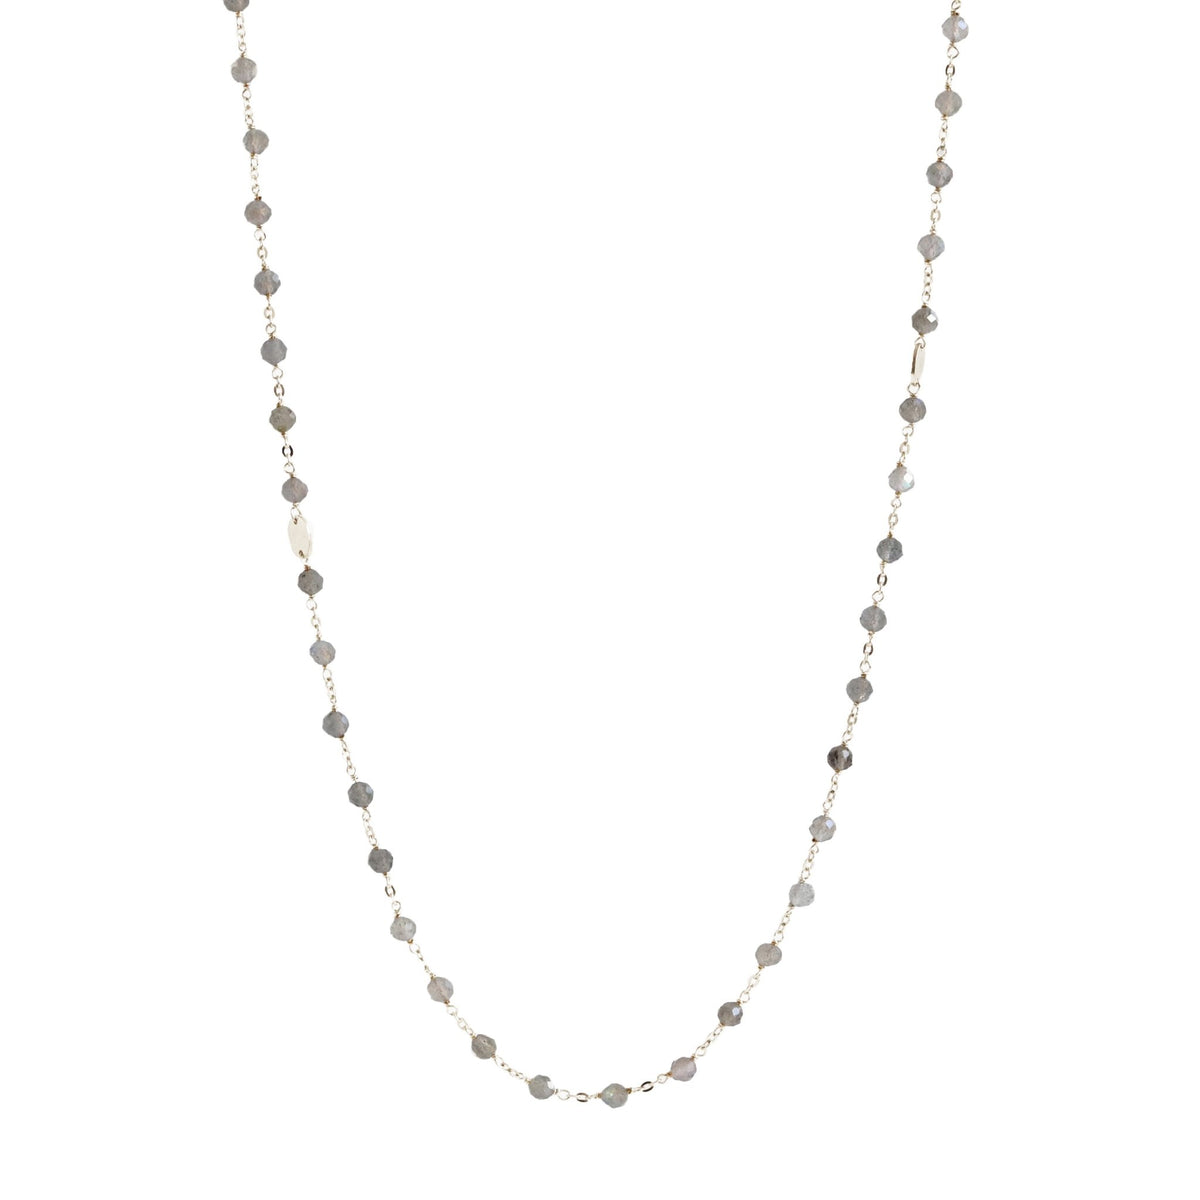 ICONIC LONG BEADED NECKLACE - LABRADORITE &amp; SILVER 34&quot; - SO PRETTY CARA COTTER